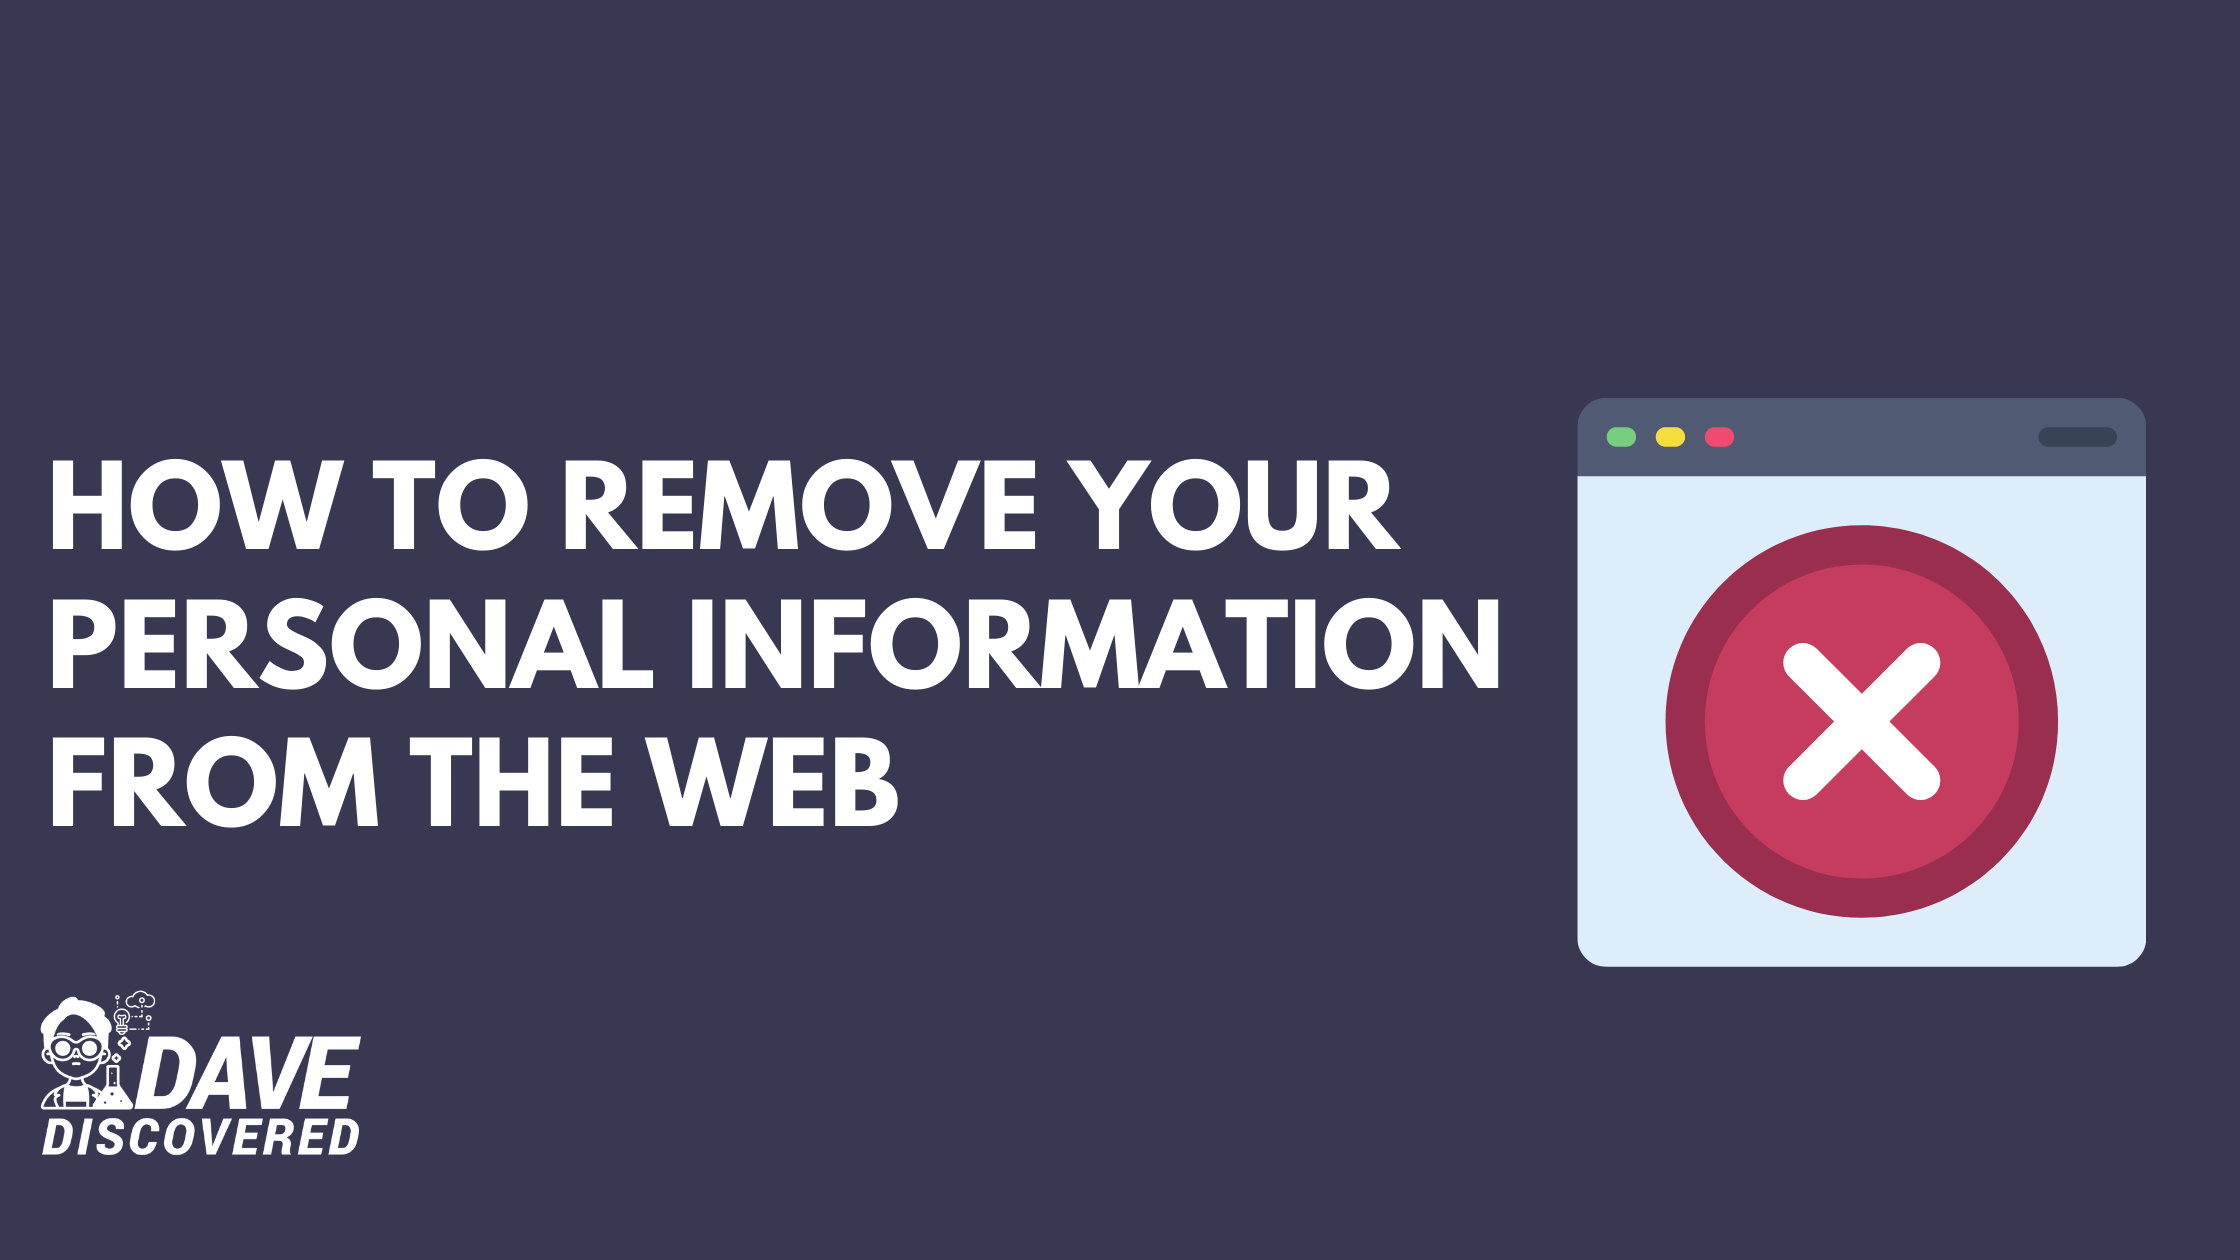 How to Remove Your Personal Information from the Web